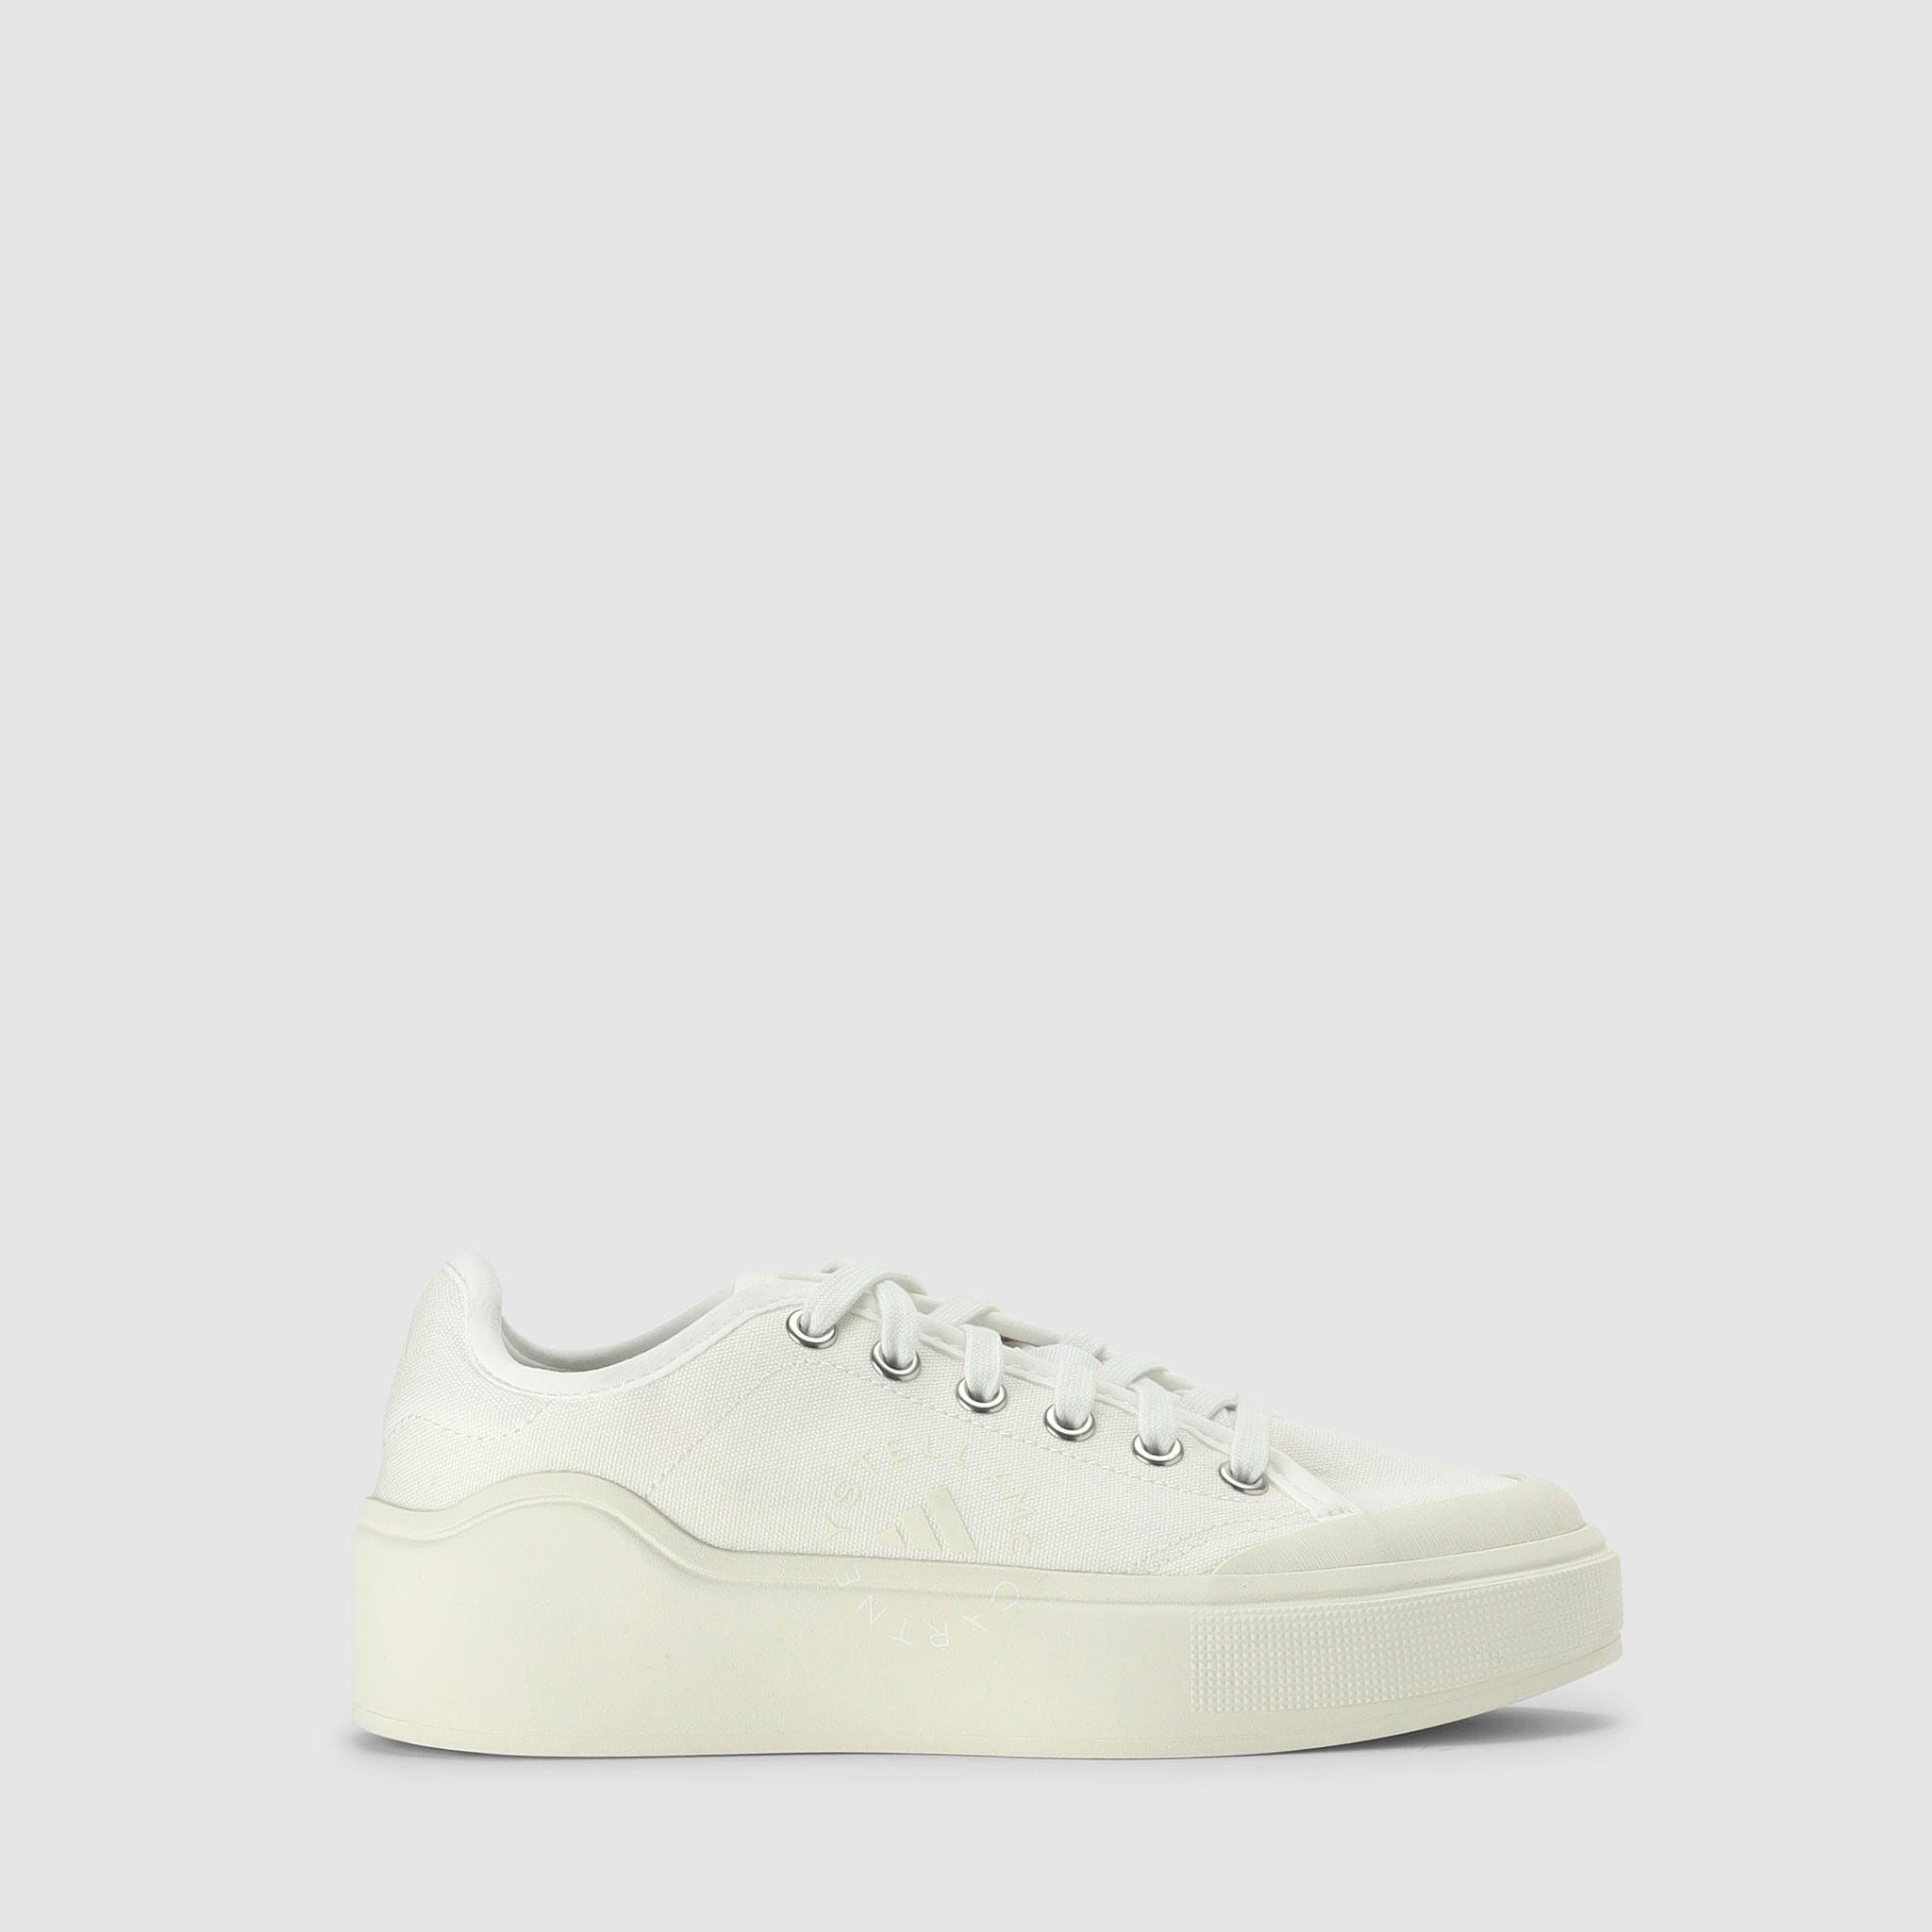 Image of Adidas By Stella McCartney Women's Court White Trainers